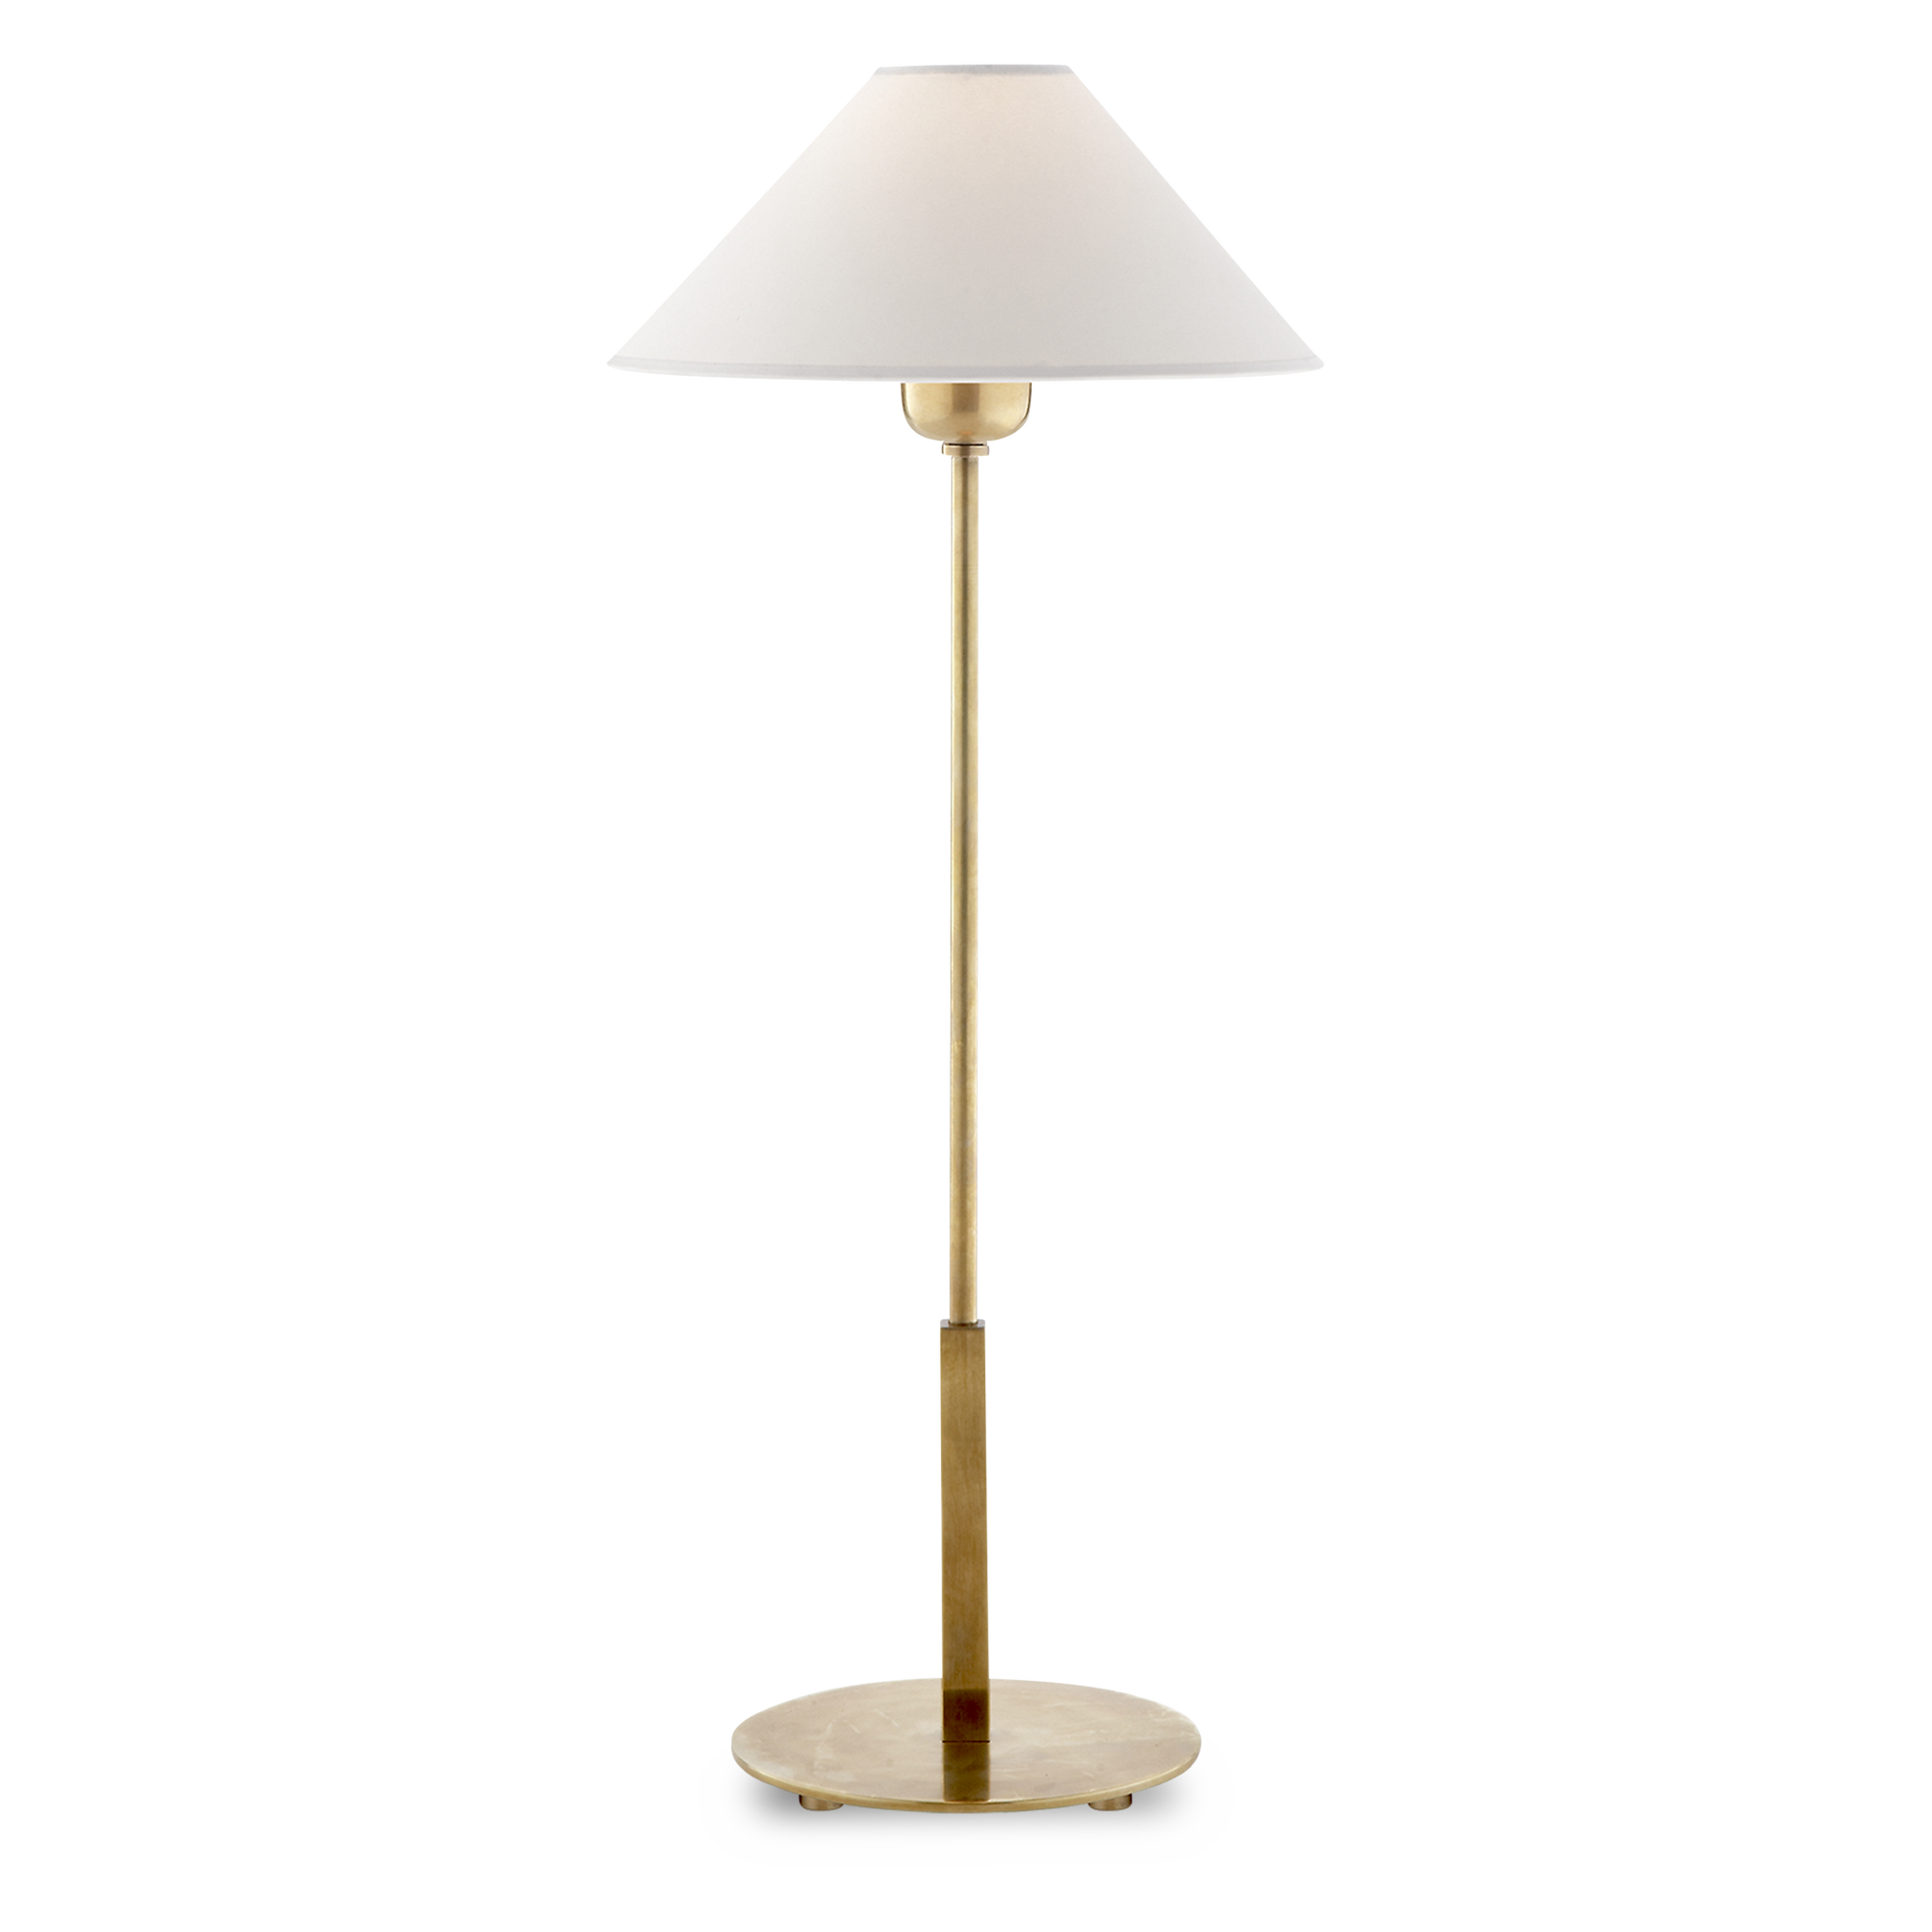 Simple and elegant table lamp with hand-rubbed antique brass base and natural paper shade.